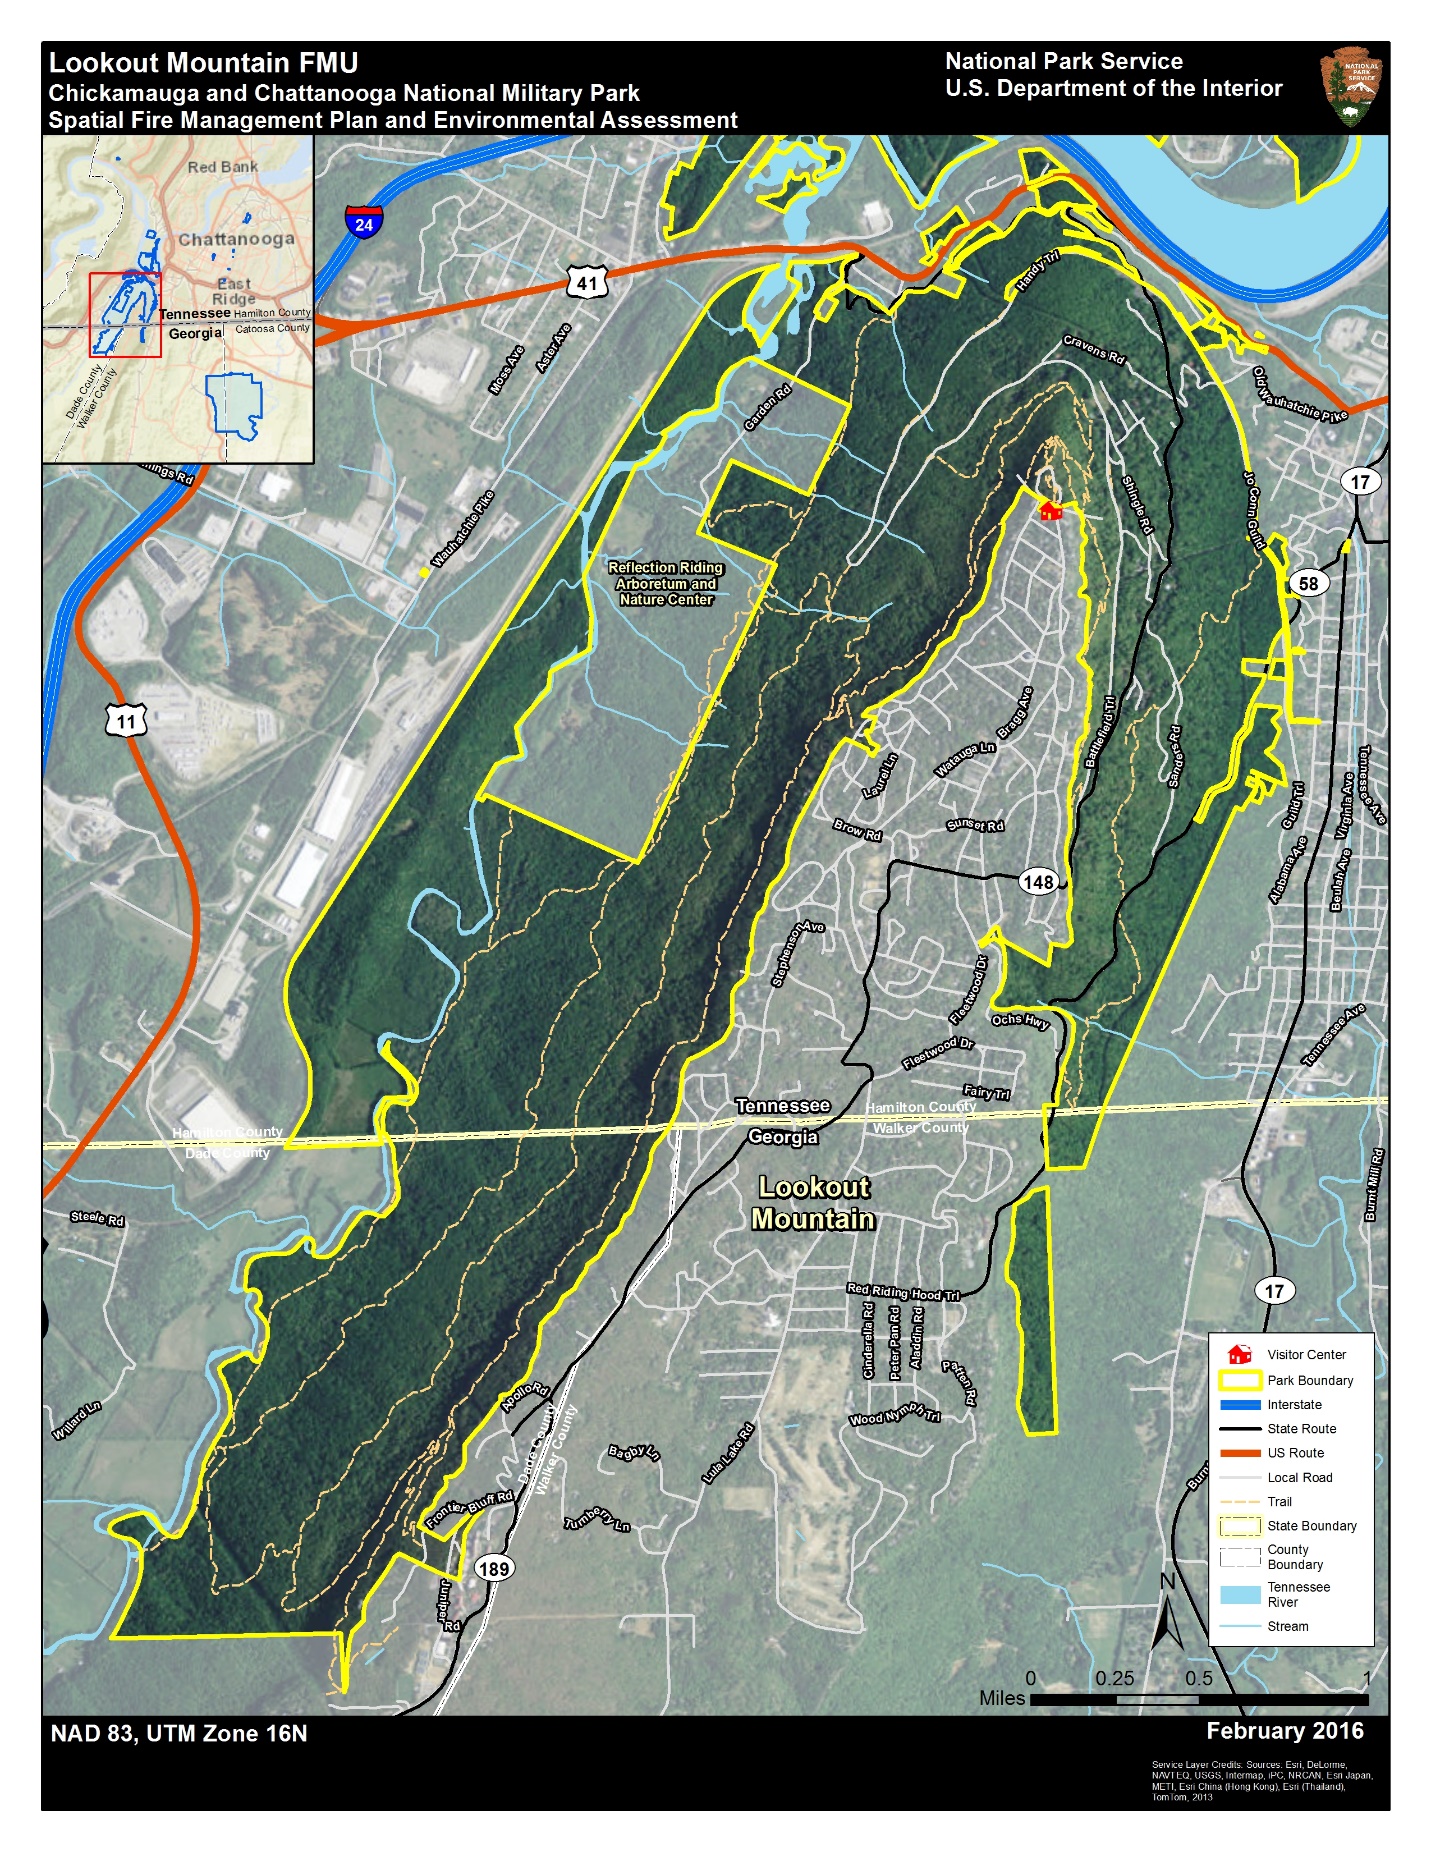 this map shows a zoomed-in view of the lookout mountain unit, with aerial photography as the base layer. the visitor center is located in the northern portion of the unit, with park lands surrounding the residential community of lookout mountain on three sides. the park unit has several trails and roads to access the park and adjacent private lands. the park unit crosses the tennessee-georgia stateline.